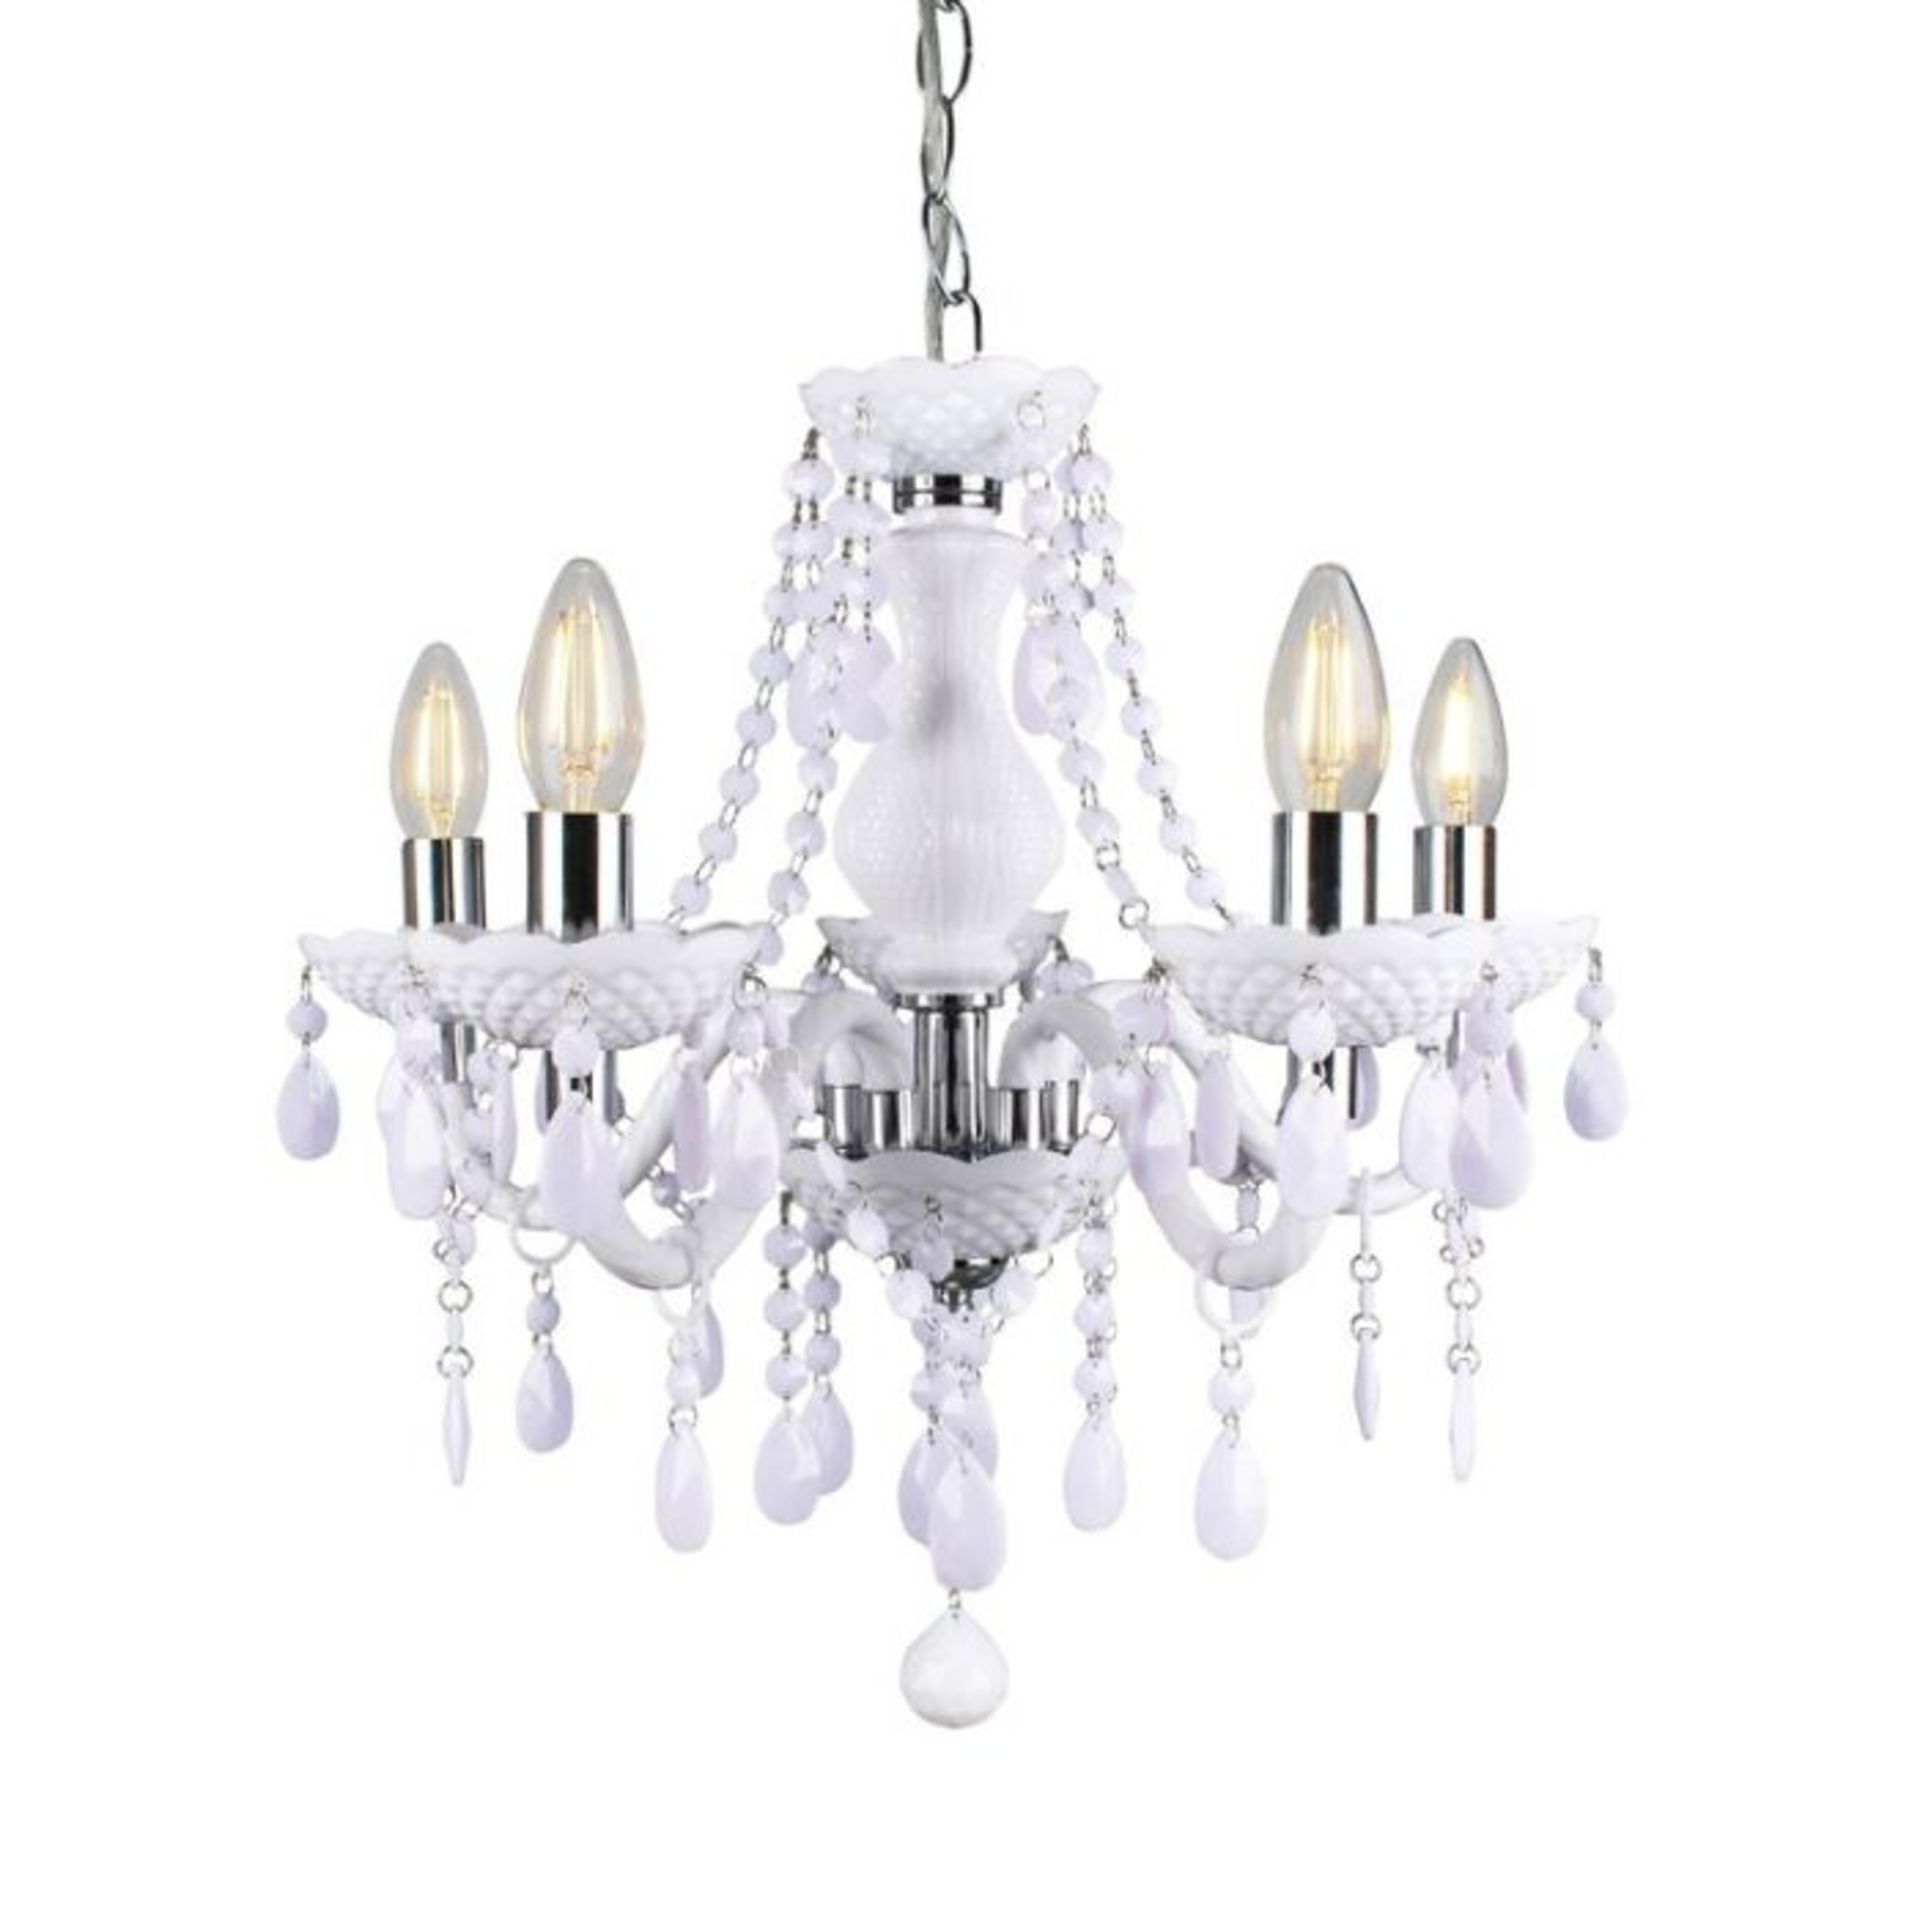 Rosdorf Park, Xan 5-Light Candle-Style Chandelier (WHITE & CHROME FINISH) - RRP £78.99 (FTCL1020 -